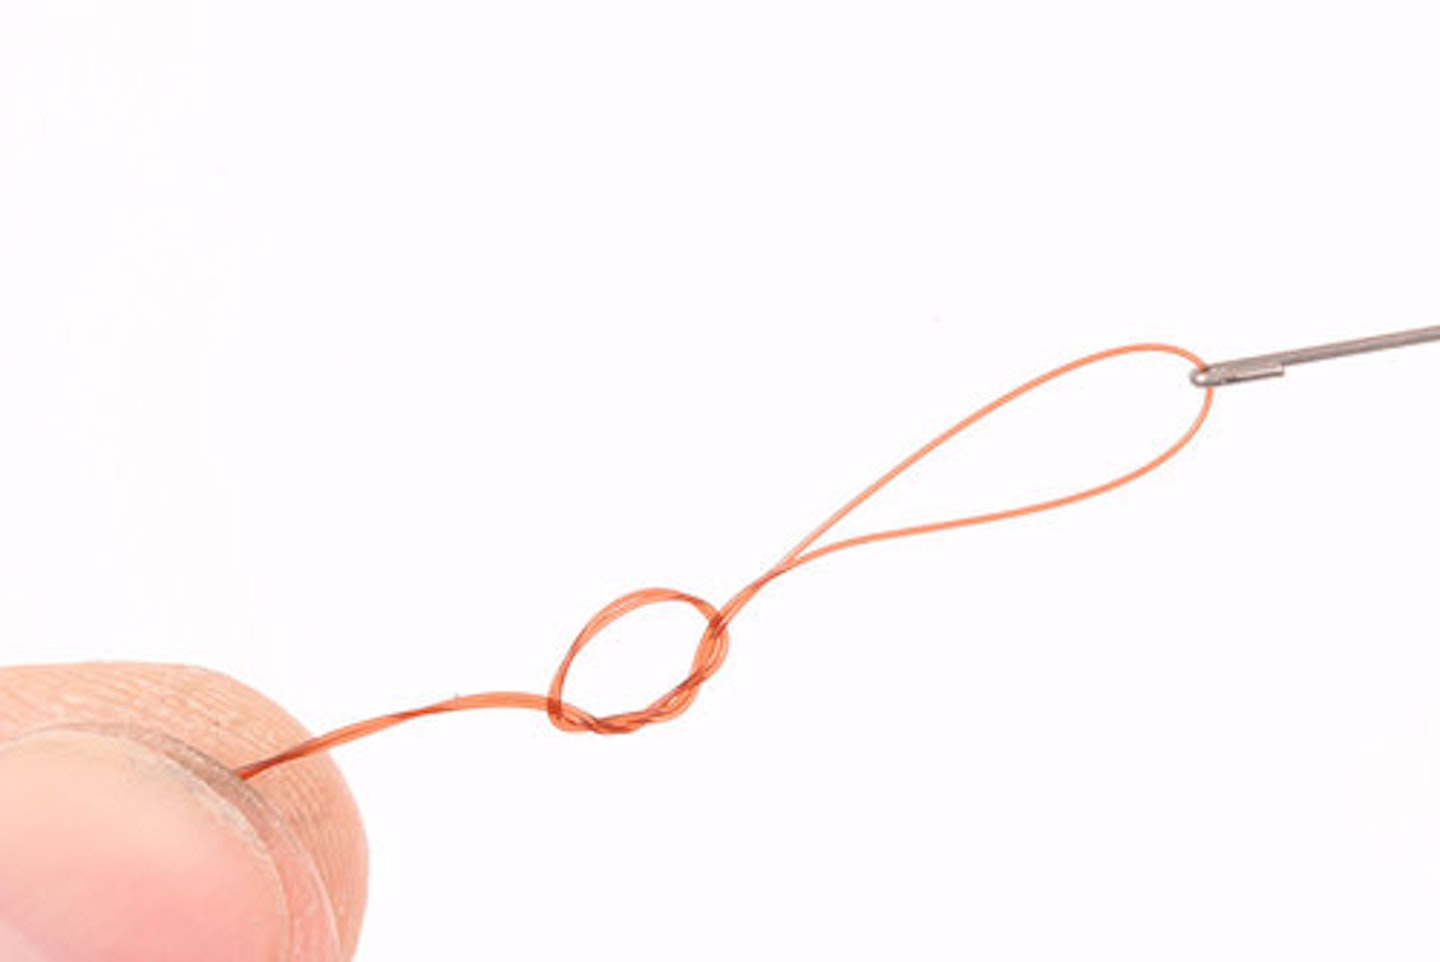 3. Tie a double overhand loop knot in the end of the mainline. The loop should be about 2cm in length. The hooklength will later be attached to this 